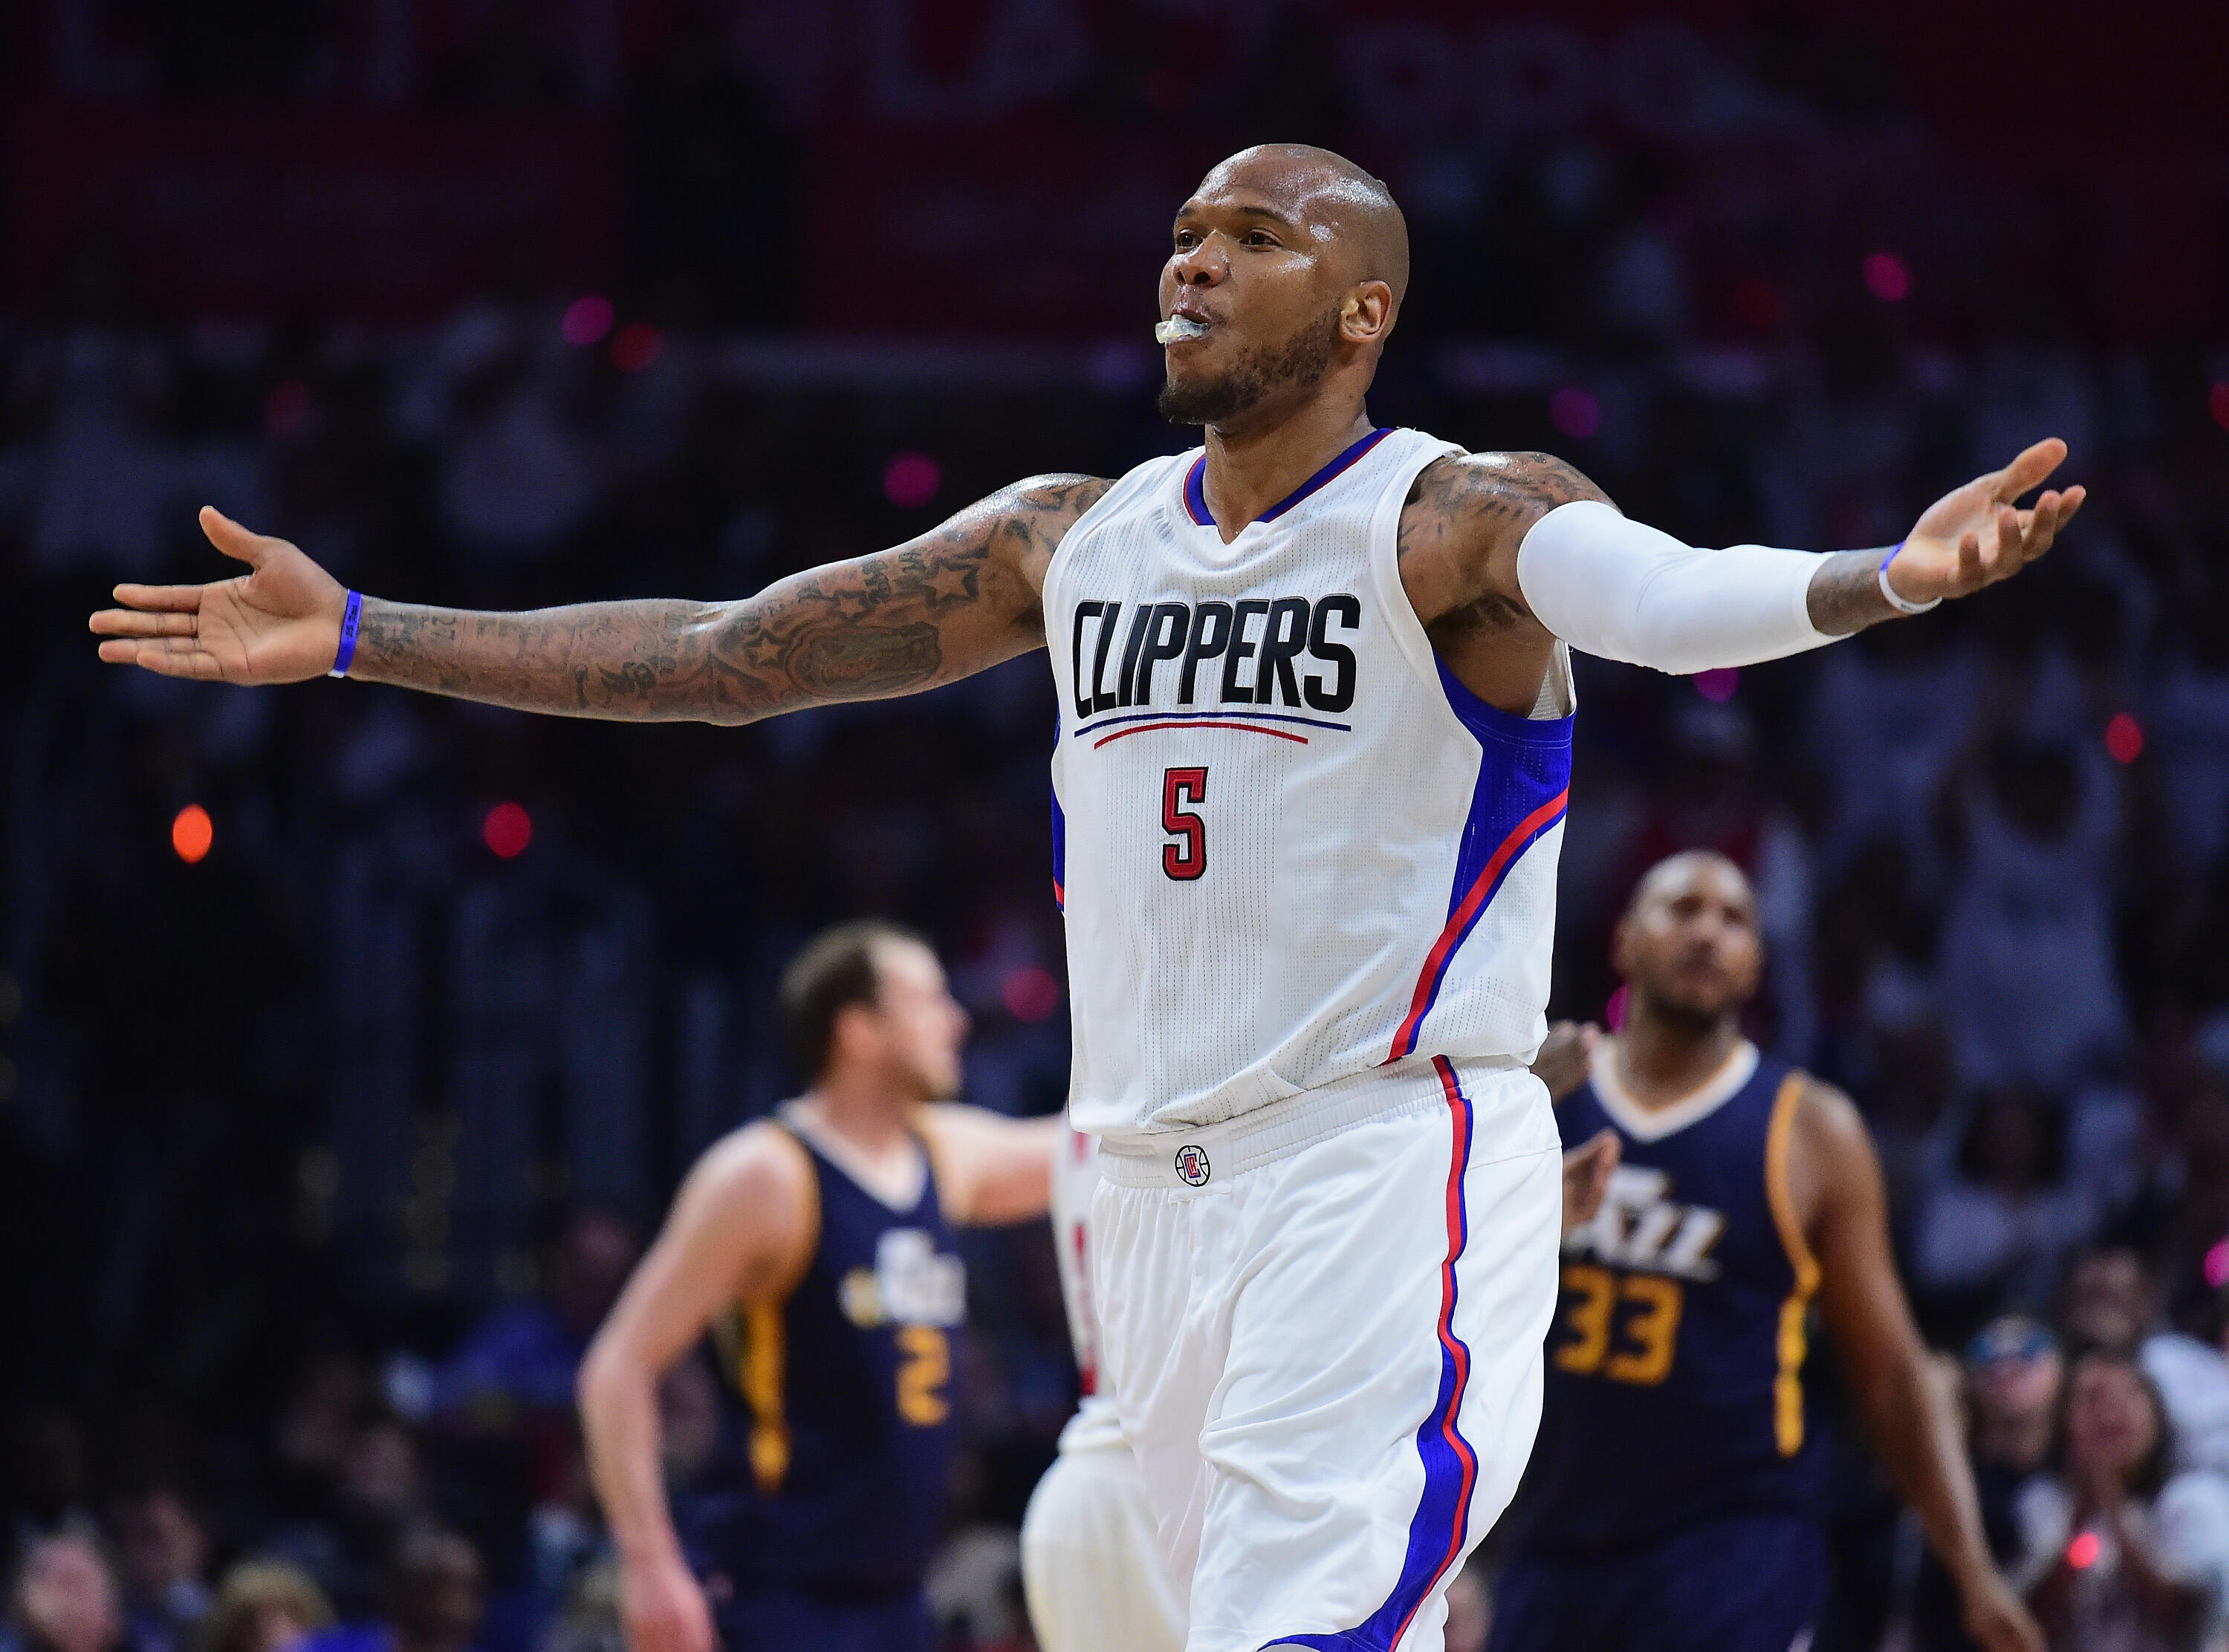 LOS ANGELES, CA - APRIL 15:  Marreese Speights #5 of the LA Clippers celebrates his pass for a dunk to DeAndre Jordan #6 during a 97-95 Jazz win at Staples Center on April 15, 2017 in Los Angeles, California.  NOTE TO USER: User expressly acknowledges and